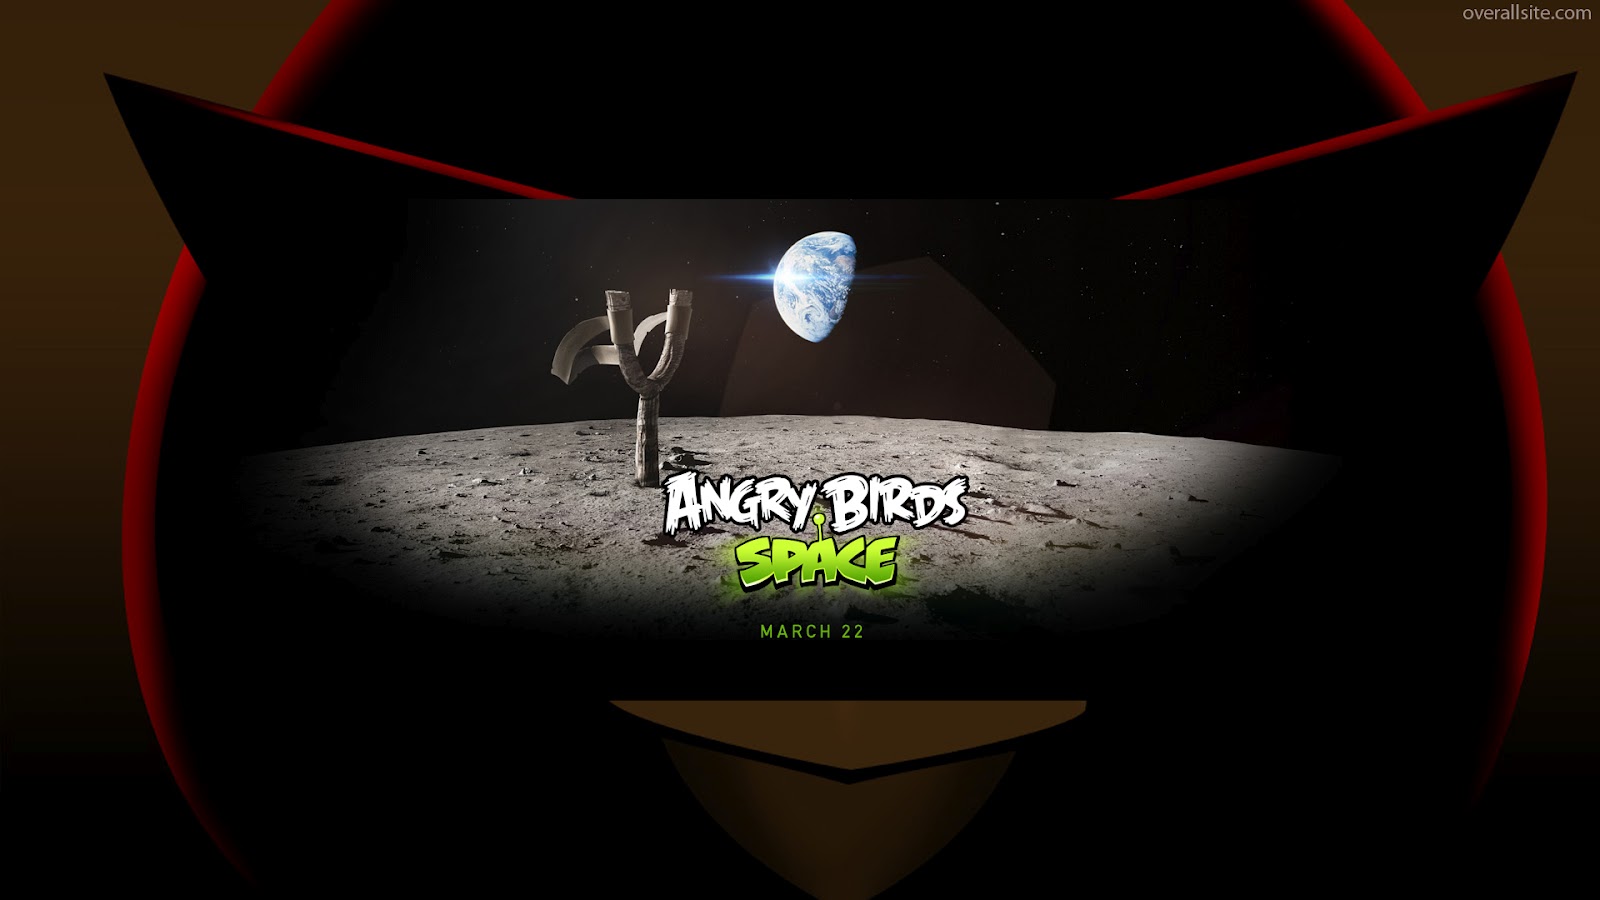 HD Wallpapers: Wallpapers HD Angry Birds Space